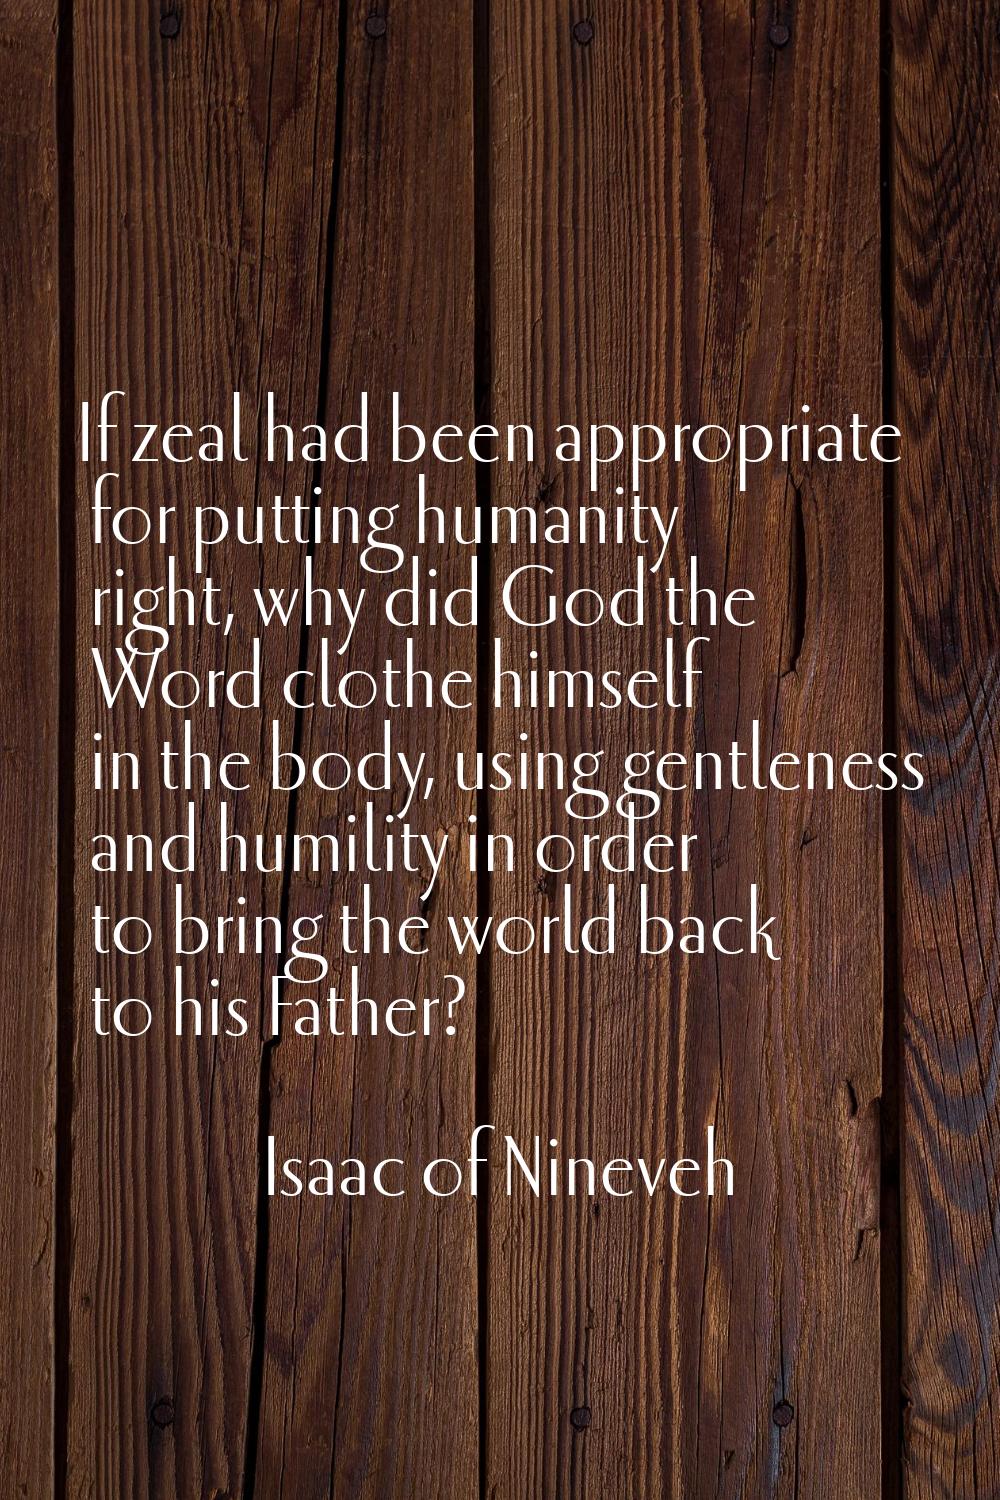 If zeal had been appropriate for putting humanity right, why did God the Word clothe himself in the